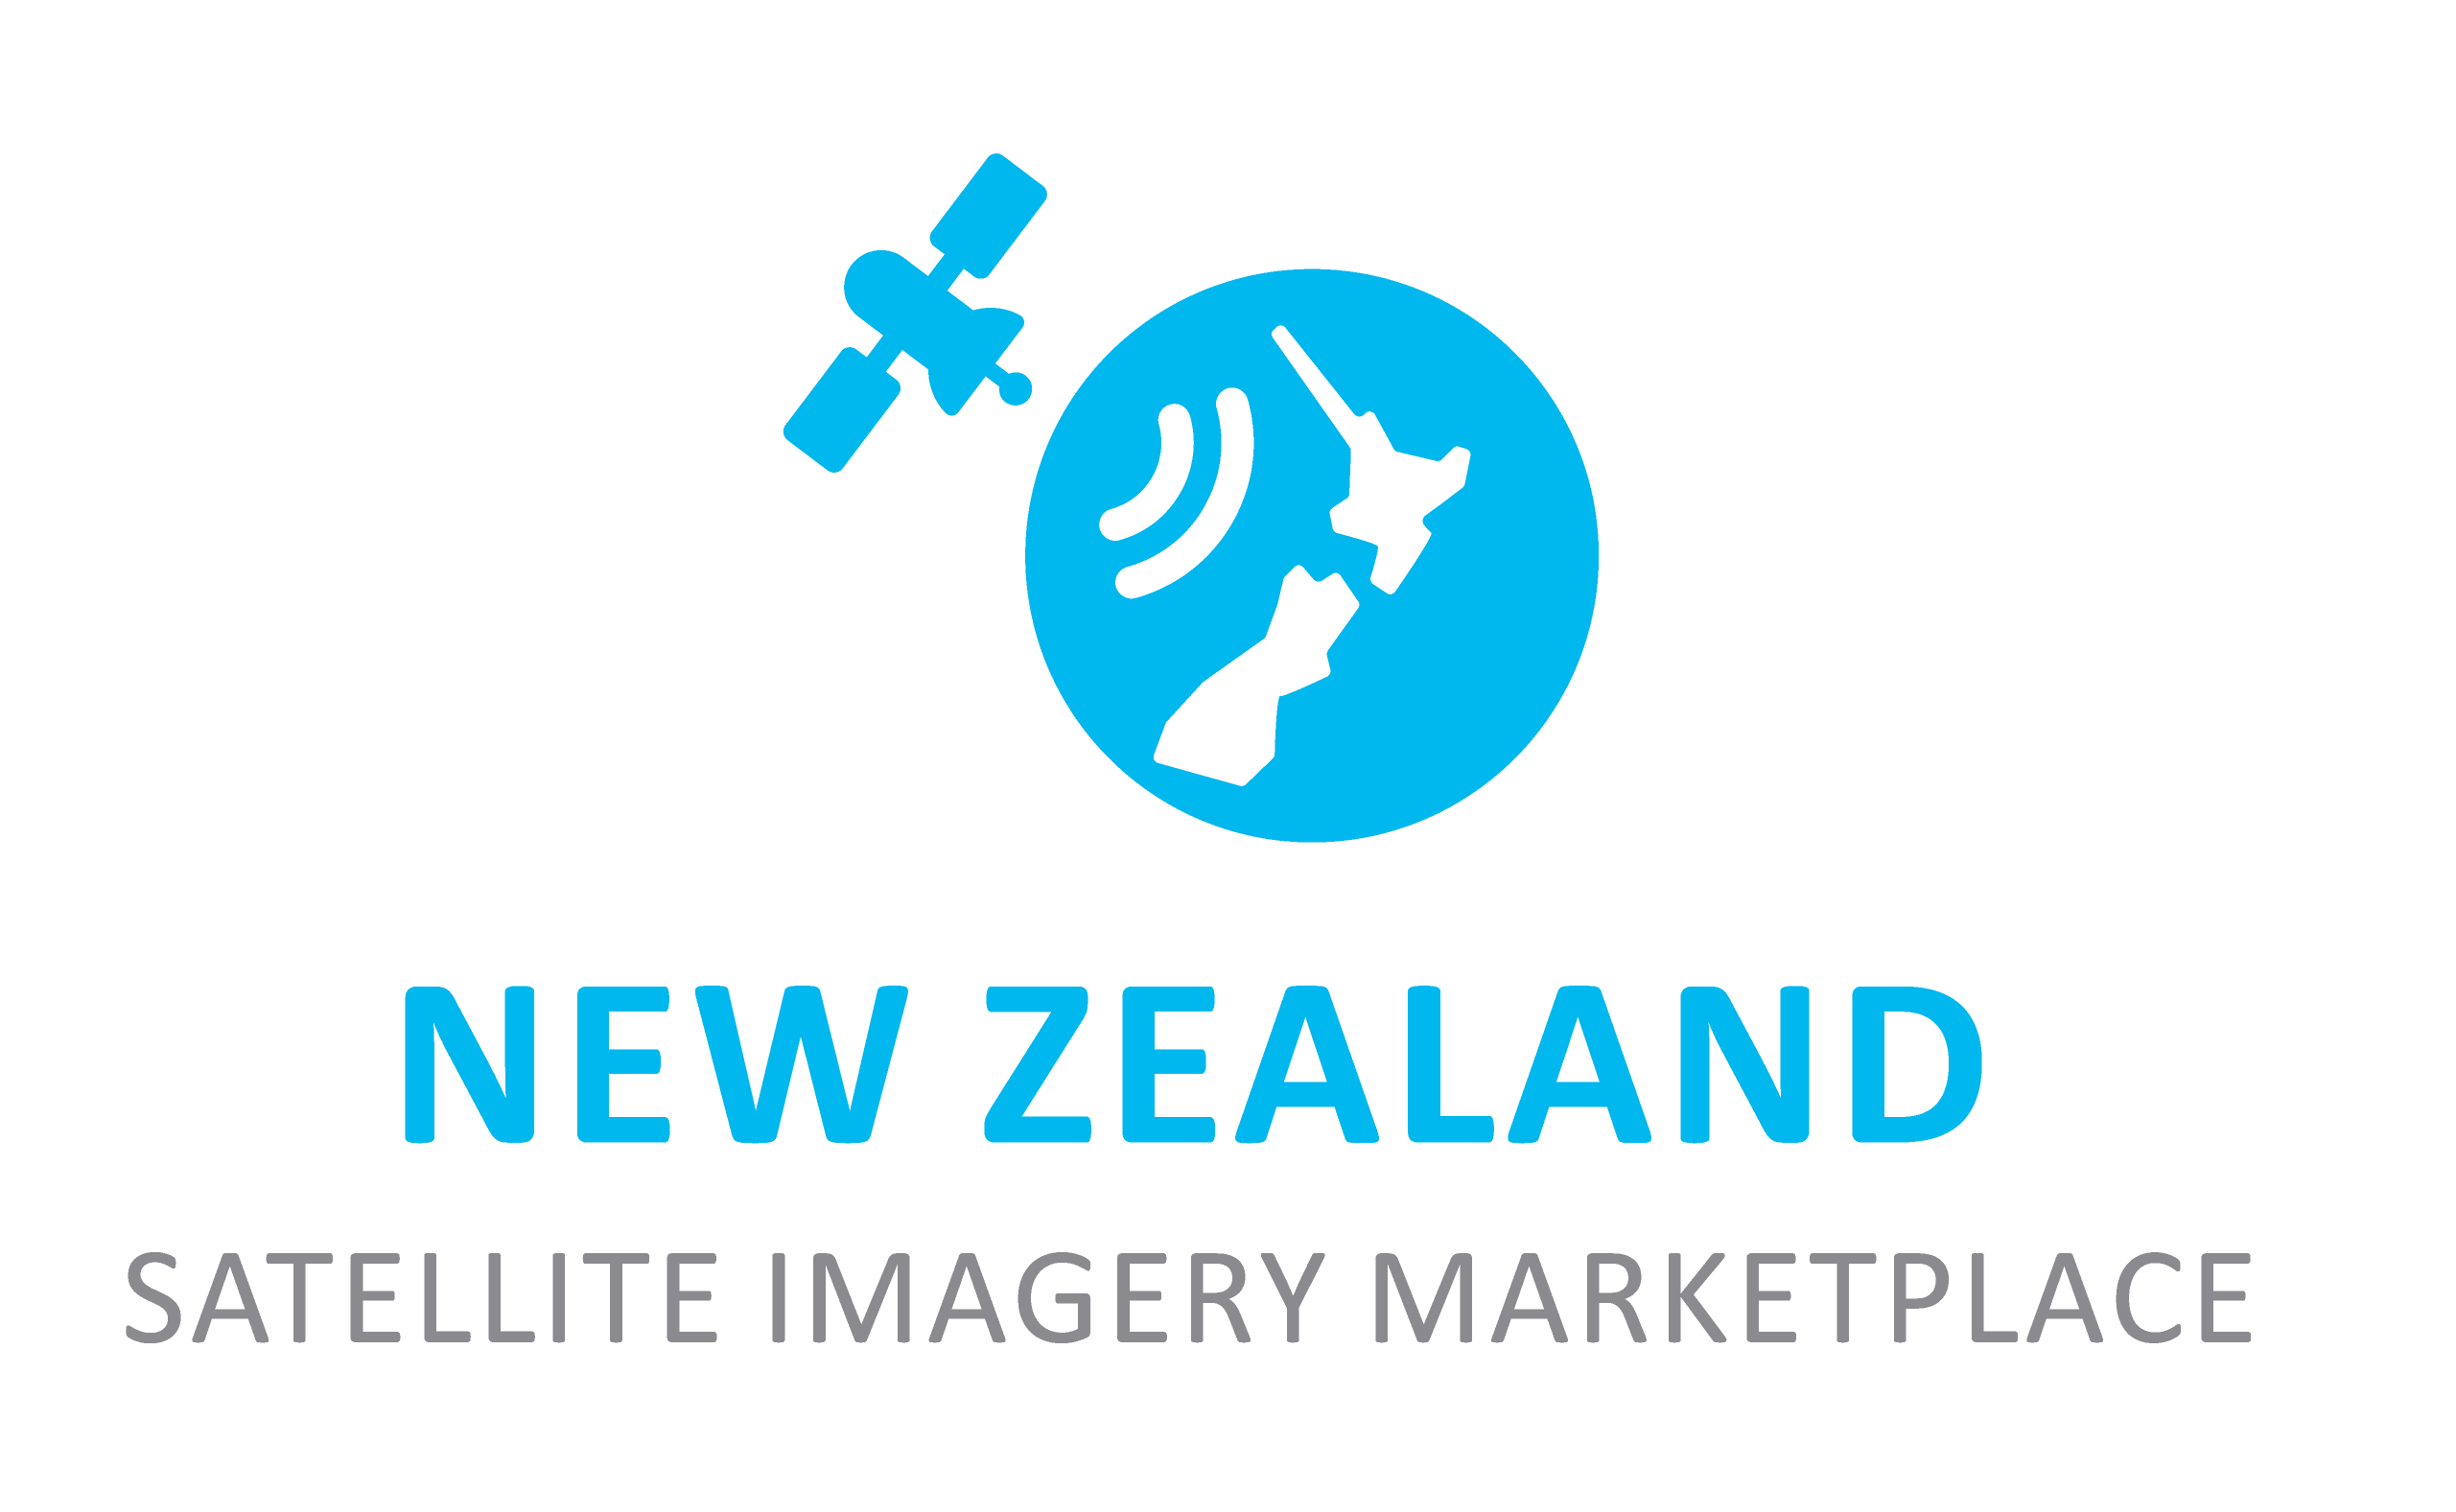 Announcing the launch of the New Zealand Satellite Imagery Marketplace